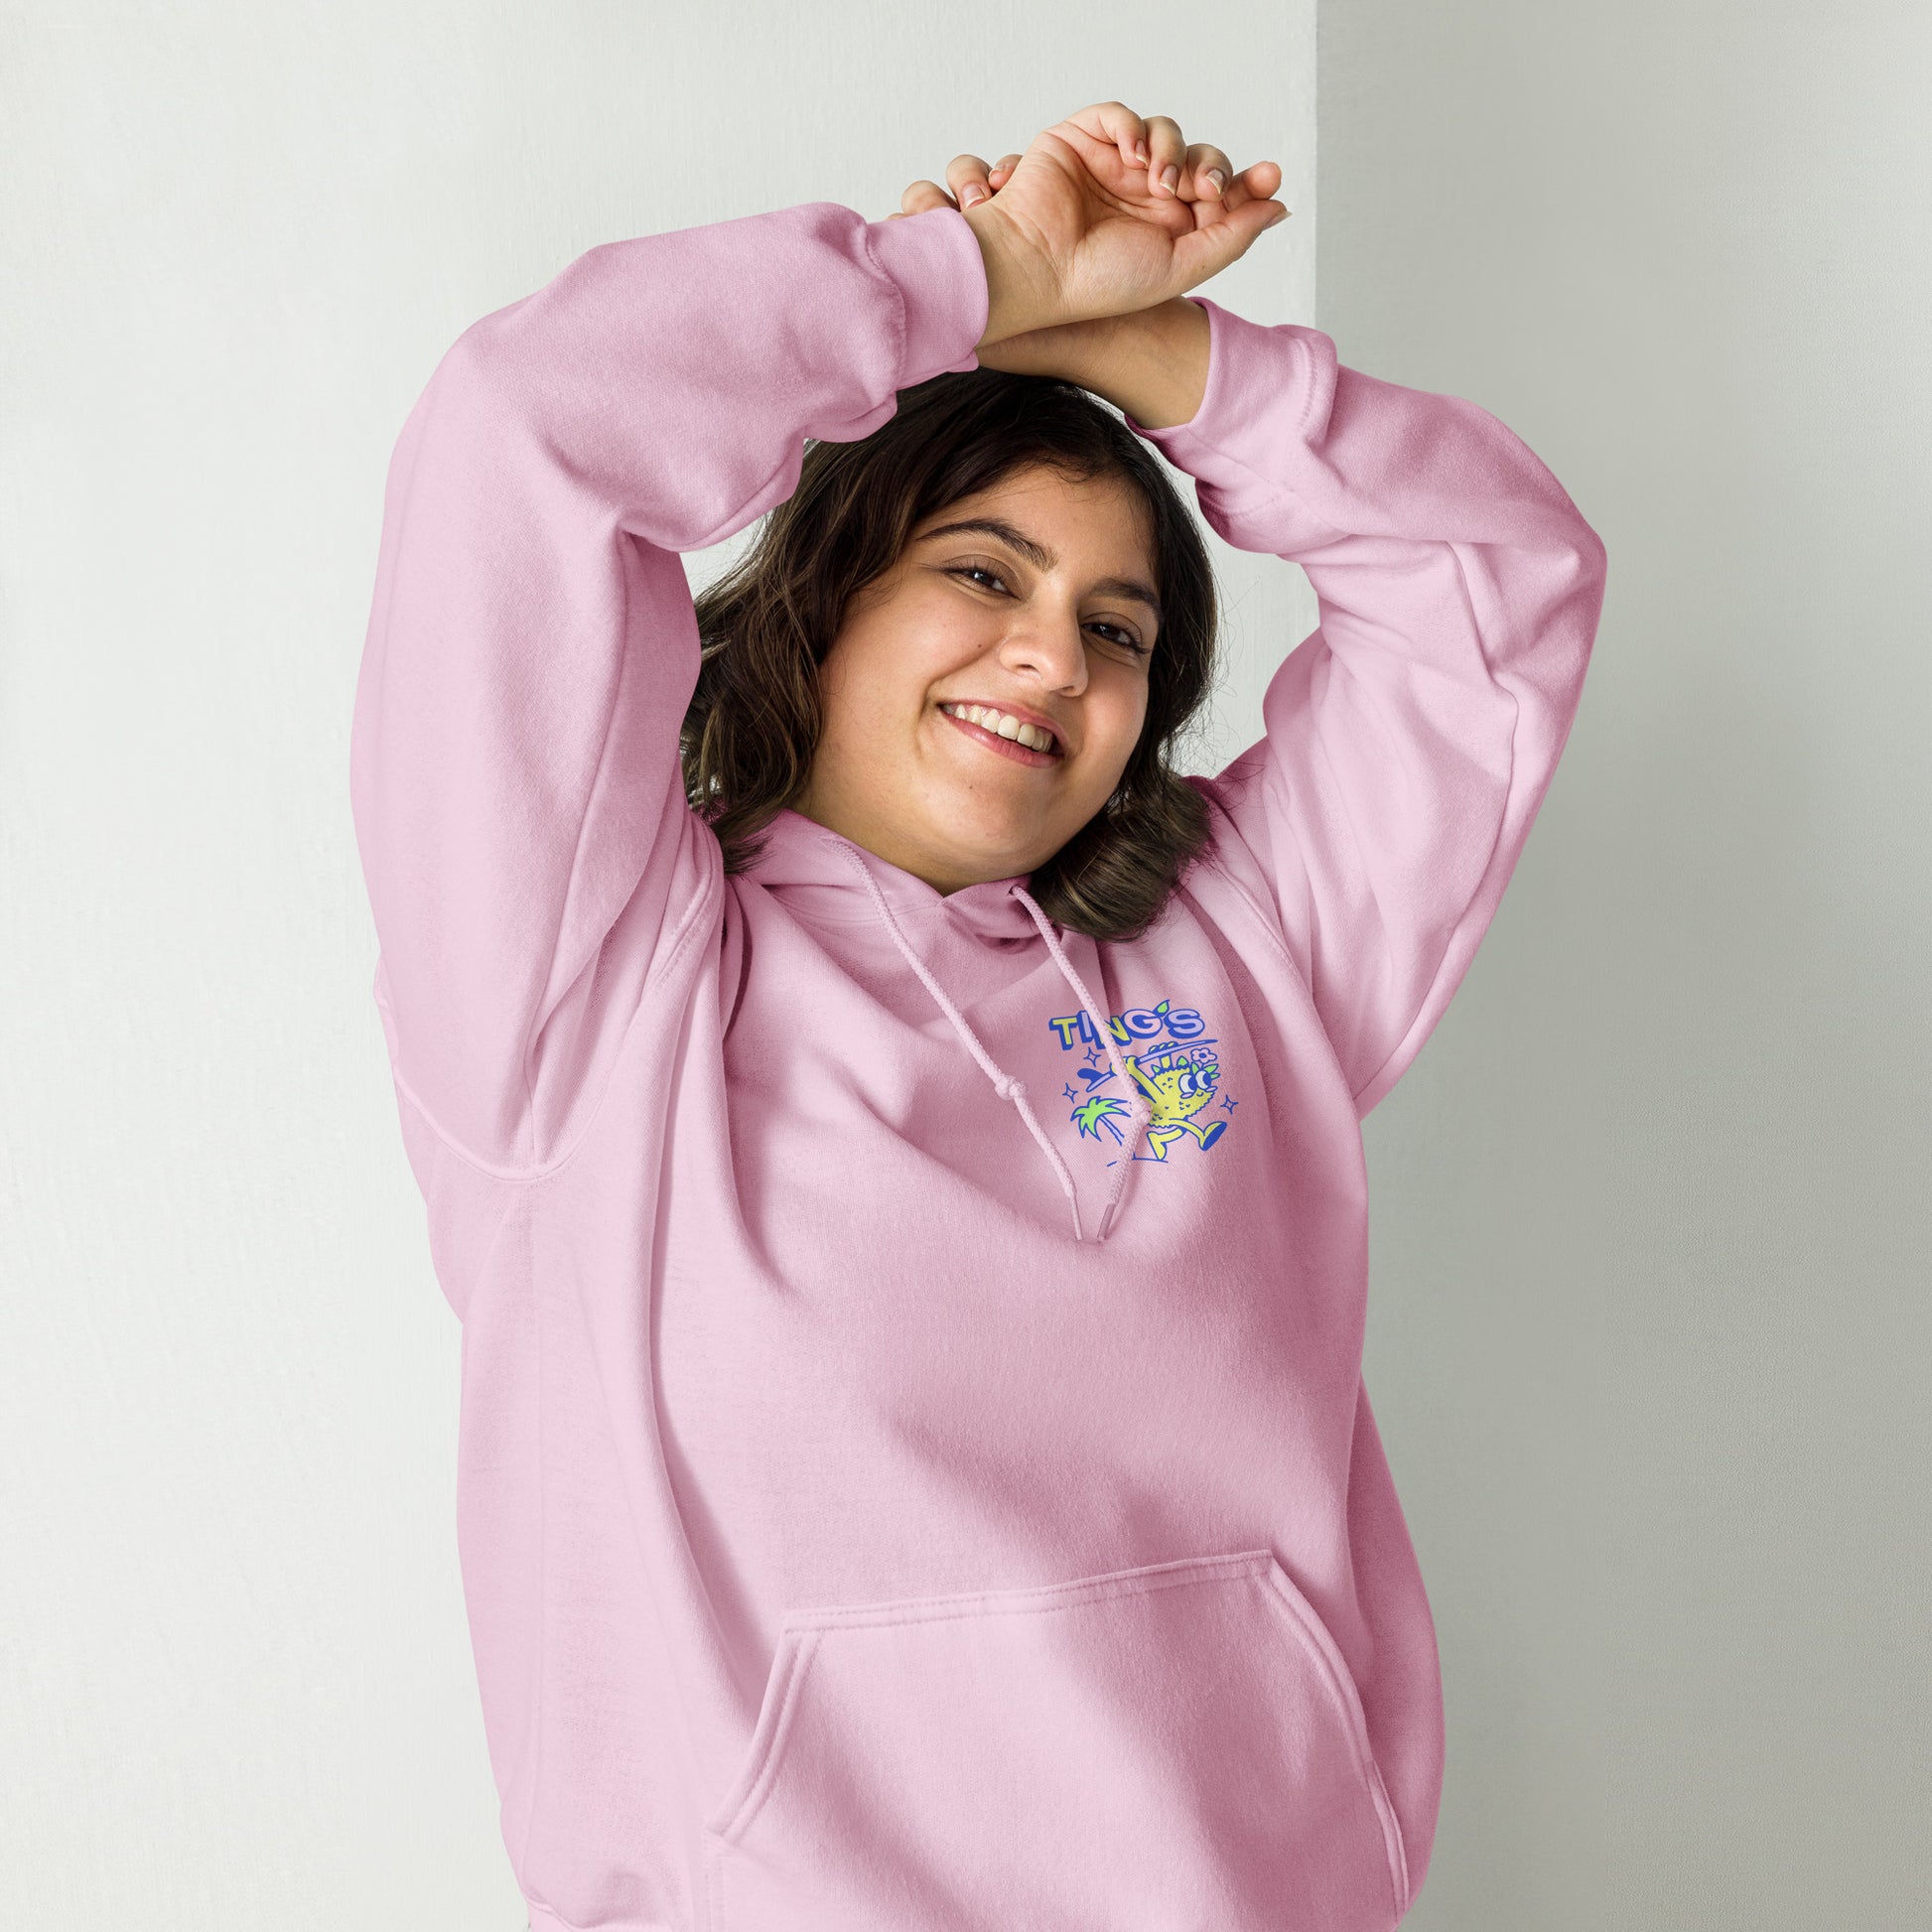 Female model wearing Ting's pink unisex hoodie with Ting's logo on front